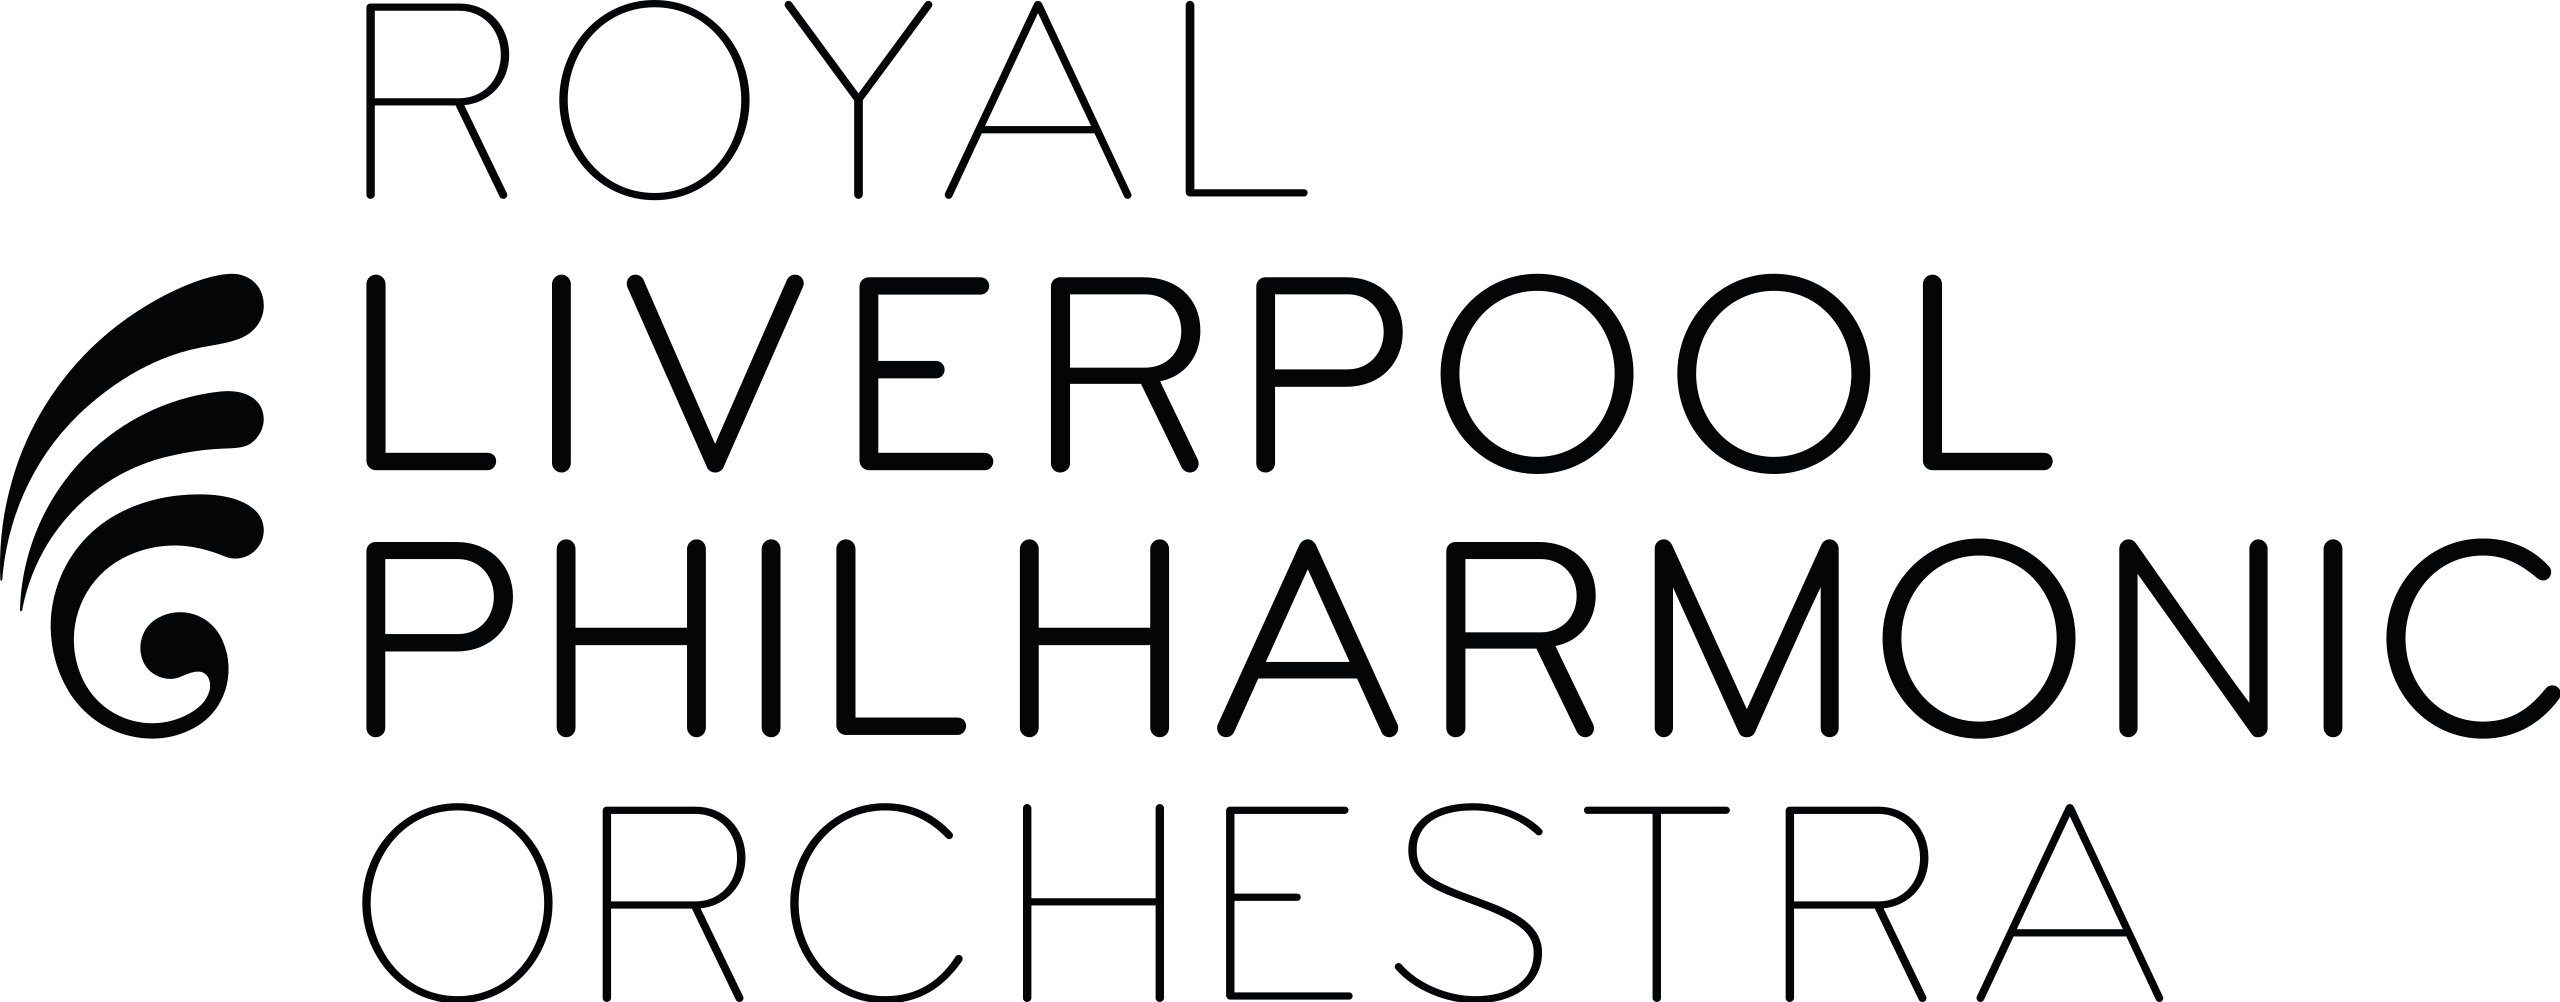 The logo for the Royal Liverpool Philharmonic